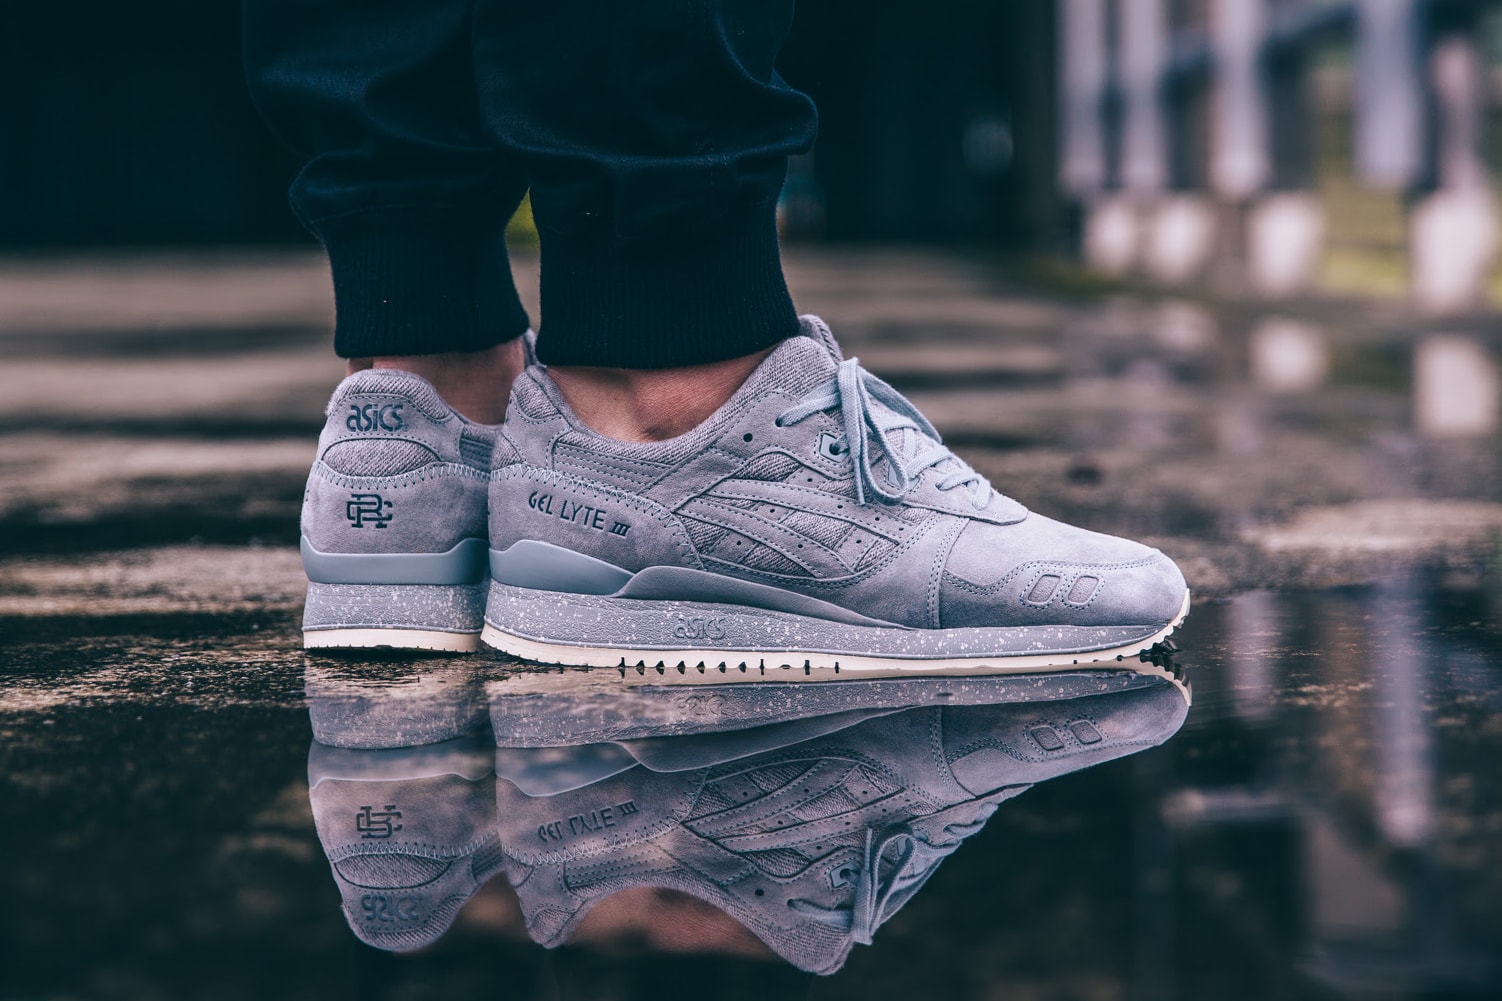 A Closer Look at the x Reigning Champ Lyte III | Hypebeast